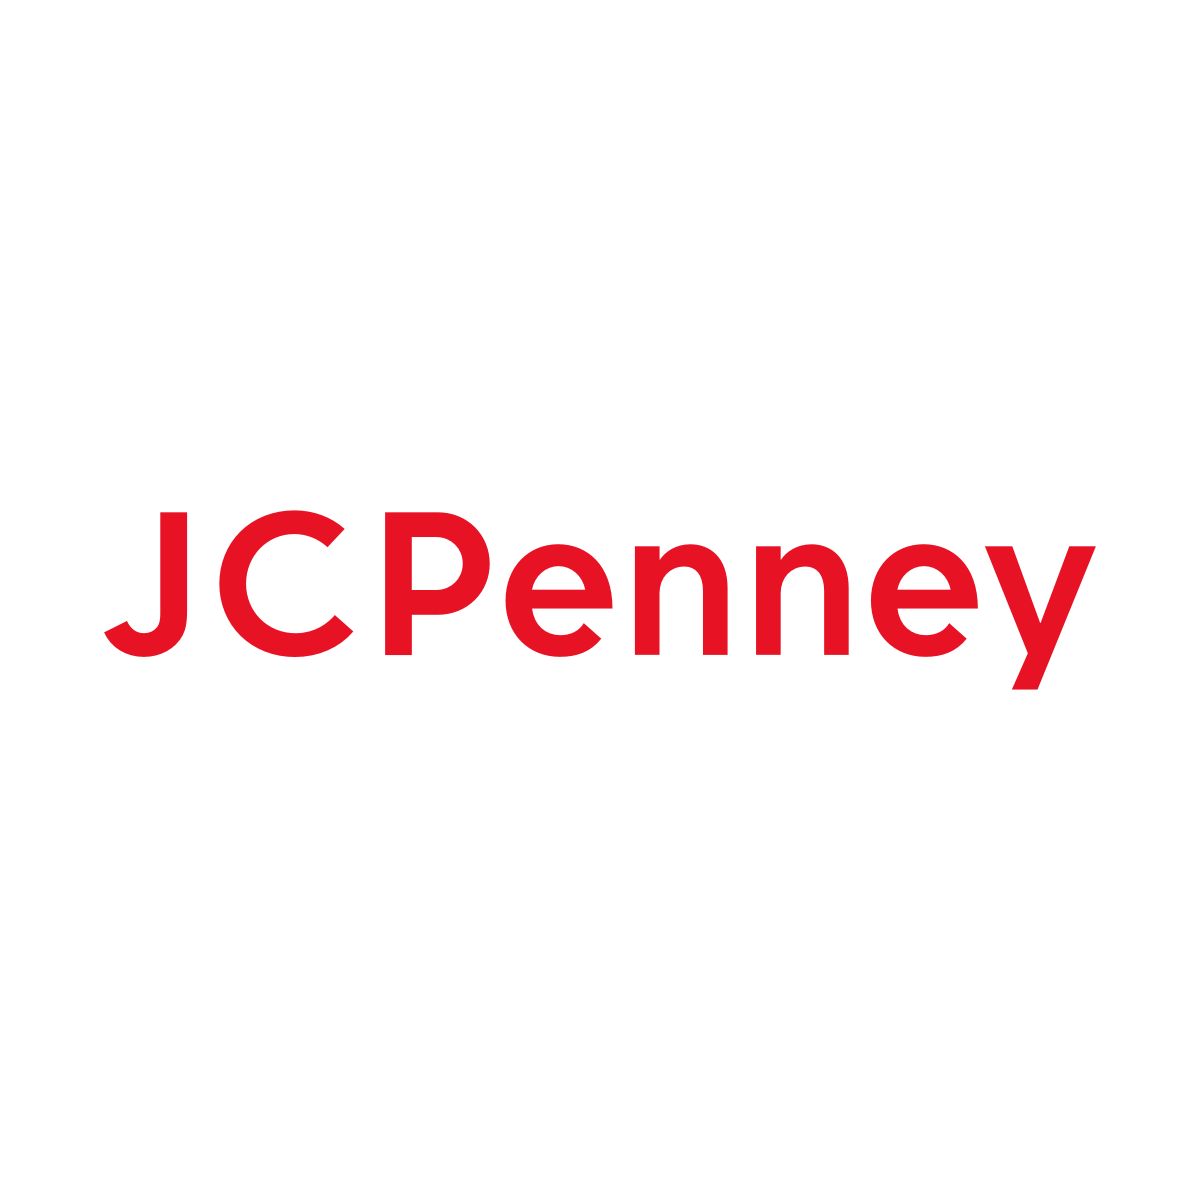 Hair Salon in Myrtle Beach, SC | Haircuts & Color | JCPenney